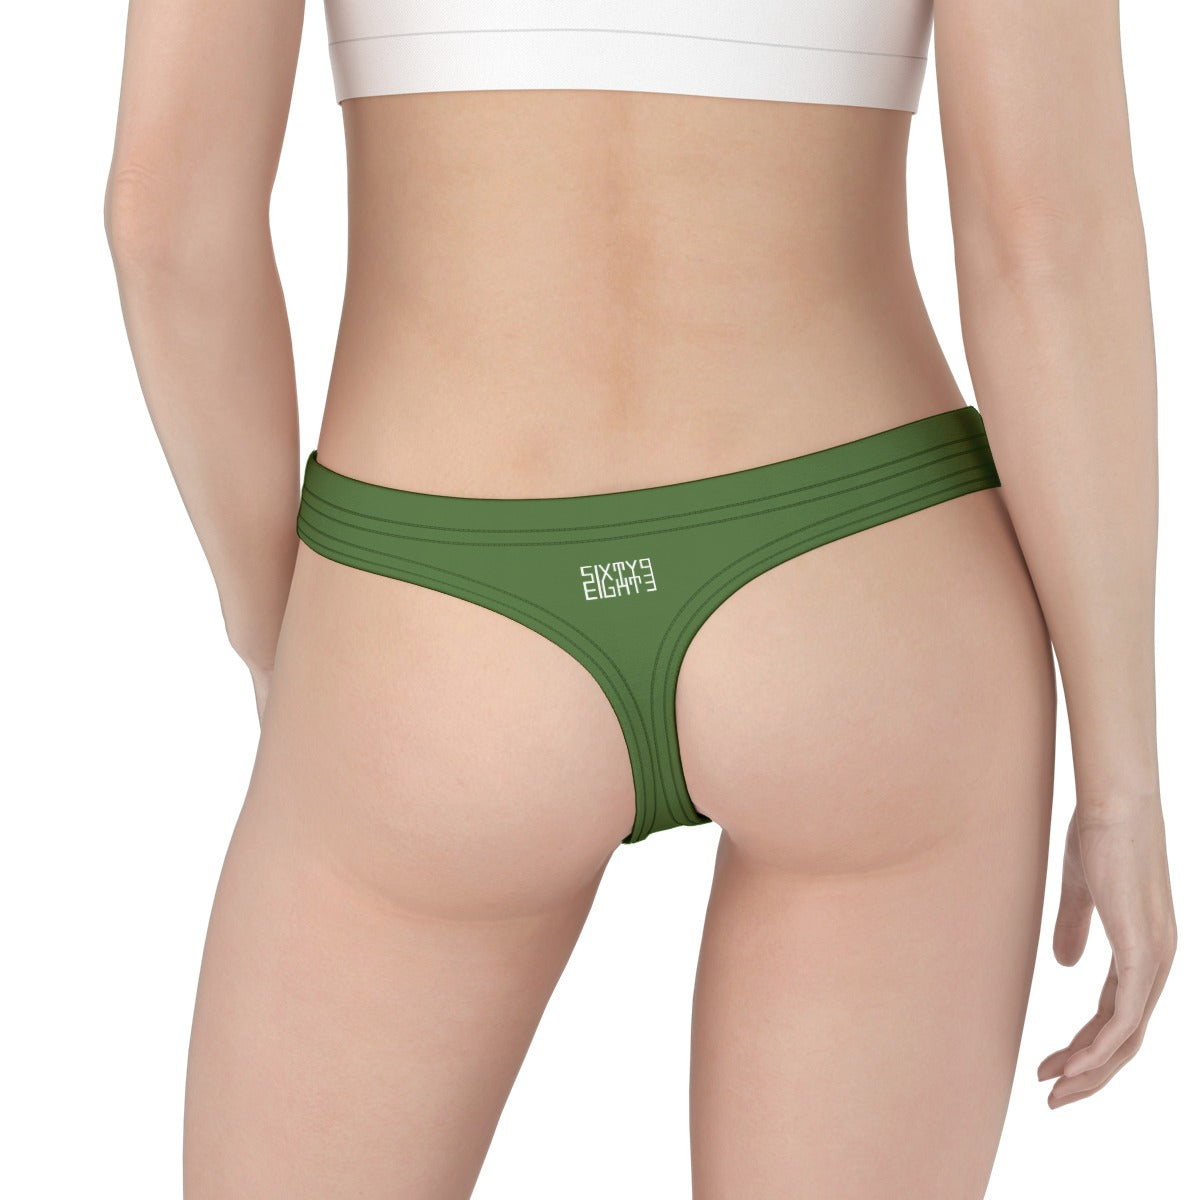 Sixty Eight 93 Logo White Forest Green Women's Low Cut Thong